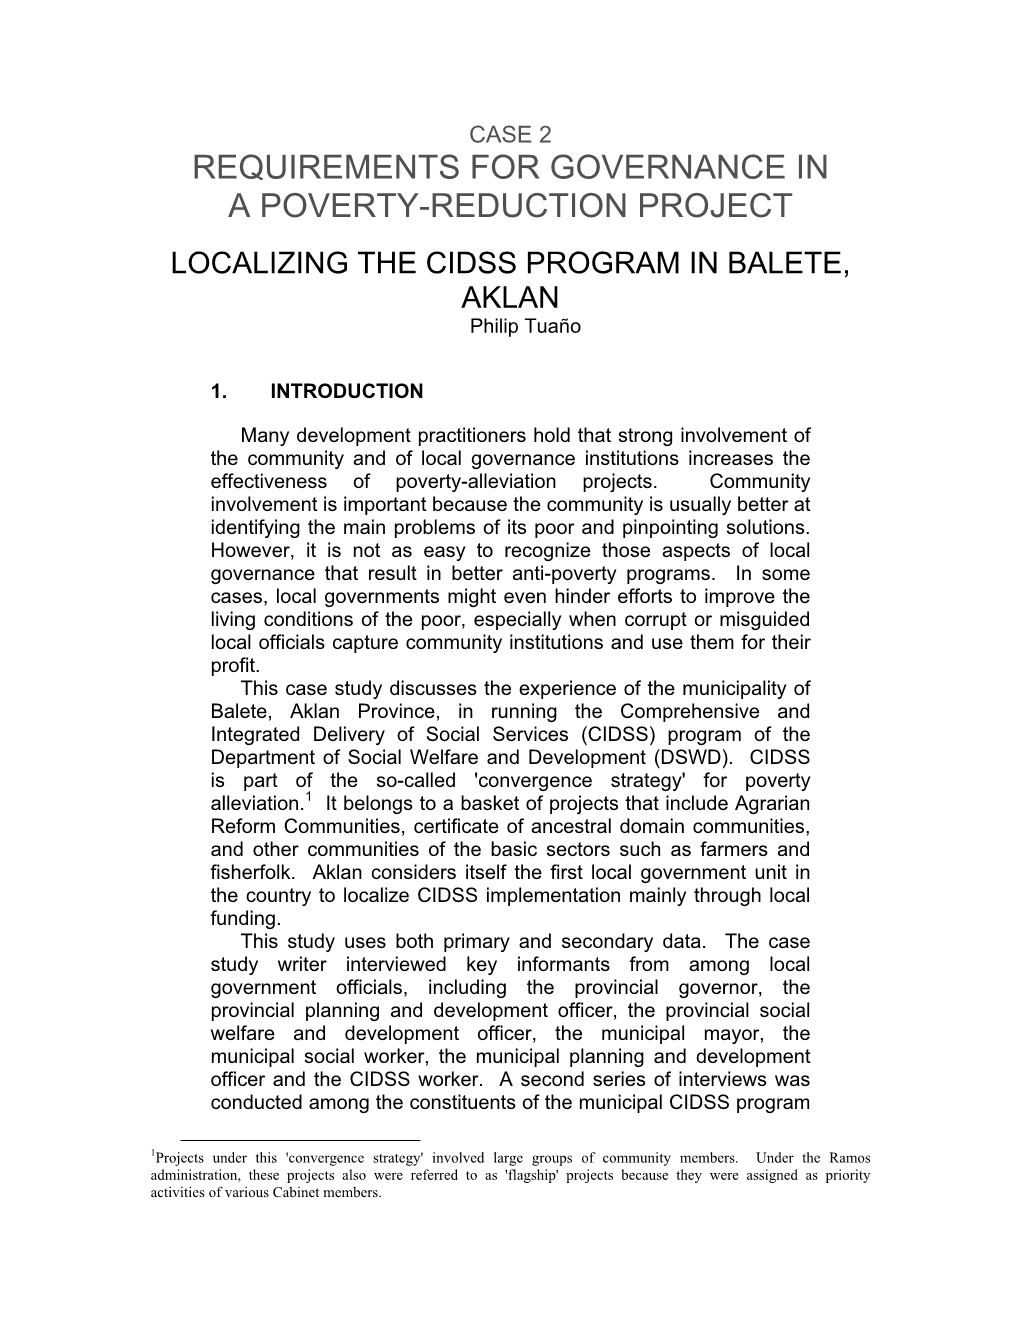 Requirements for Governance in a Poverty-Reduction Project